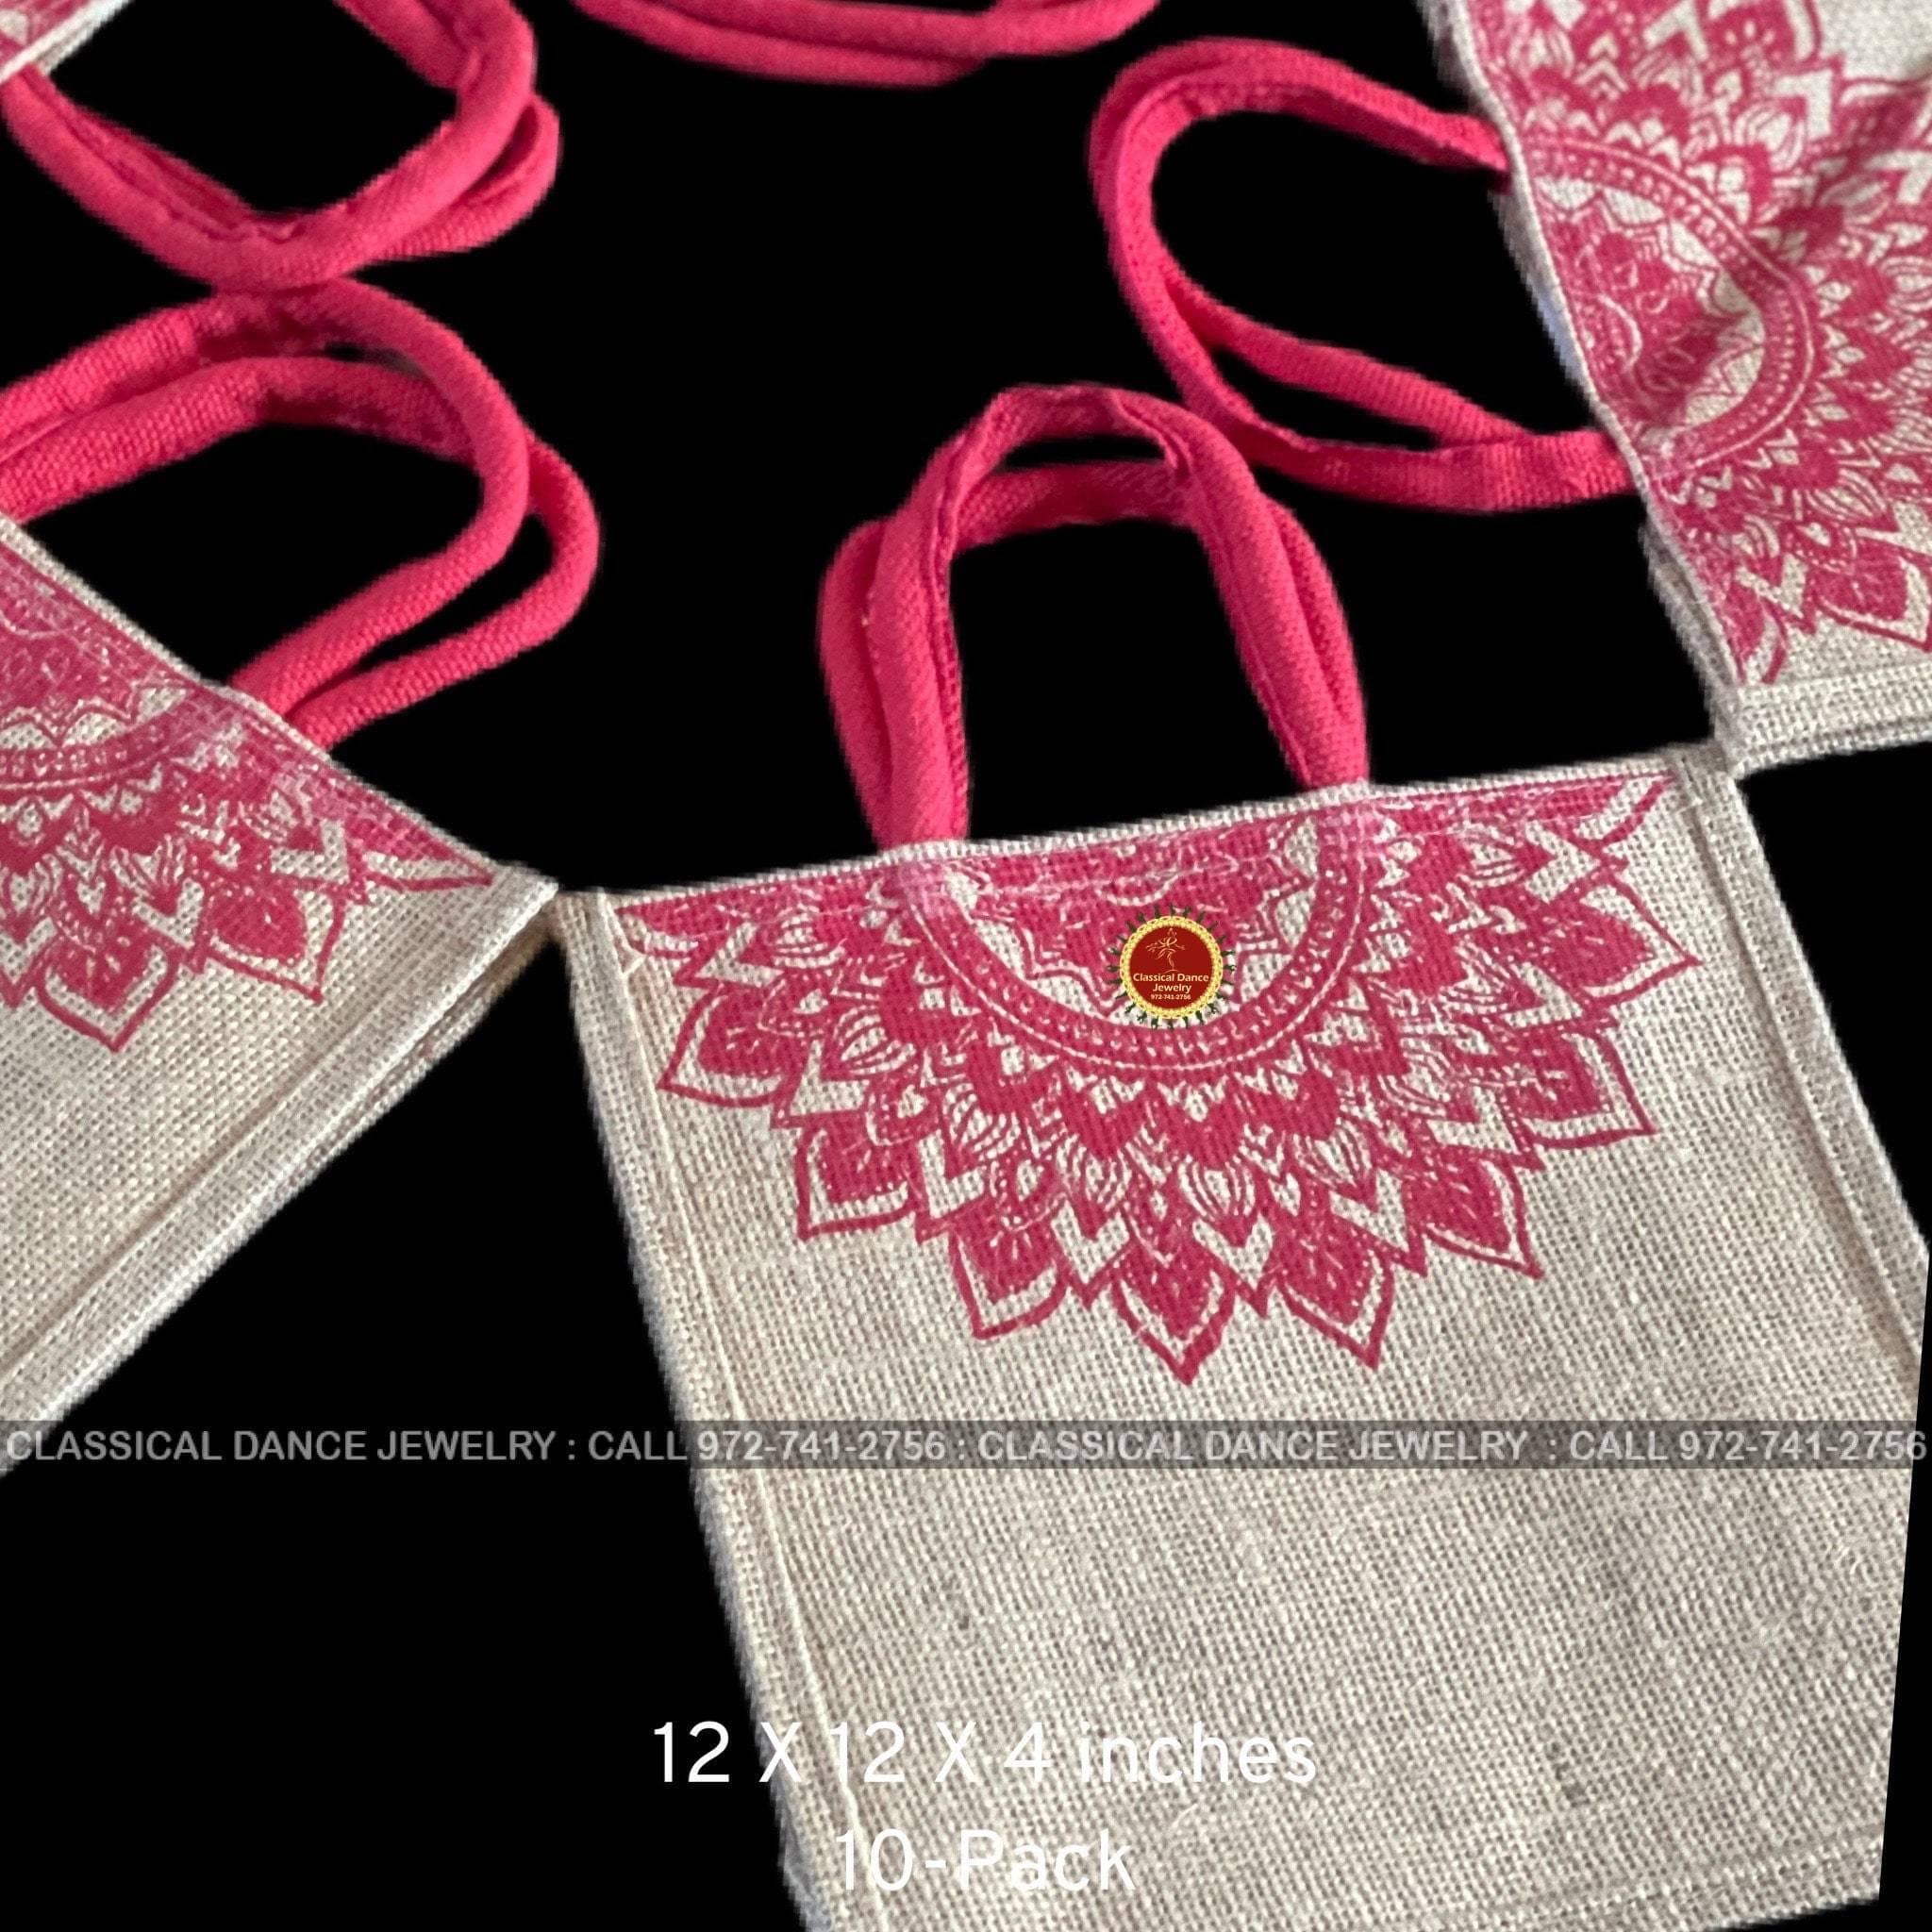 Wholesale Jute Bags With Ganesha Print for Return Gifts Thamboolam Bags  Wedding Gifts Lunch Bag Multicolor 864 Inches Gifts - Etsy